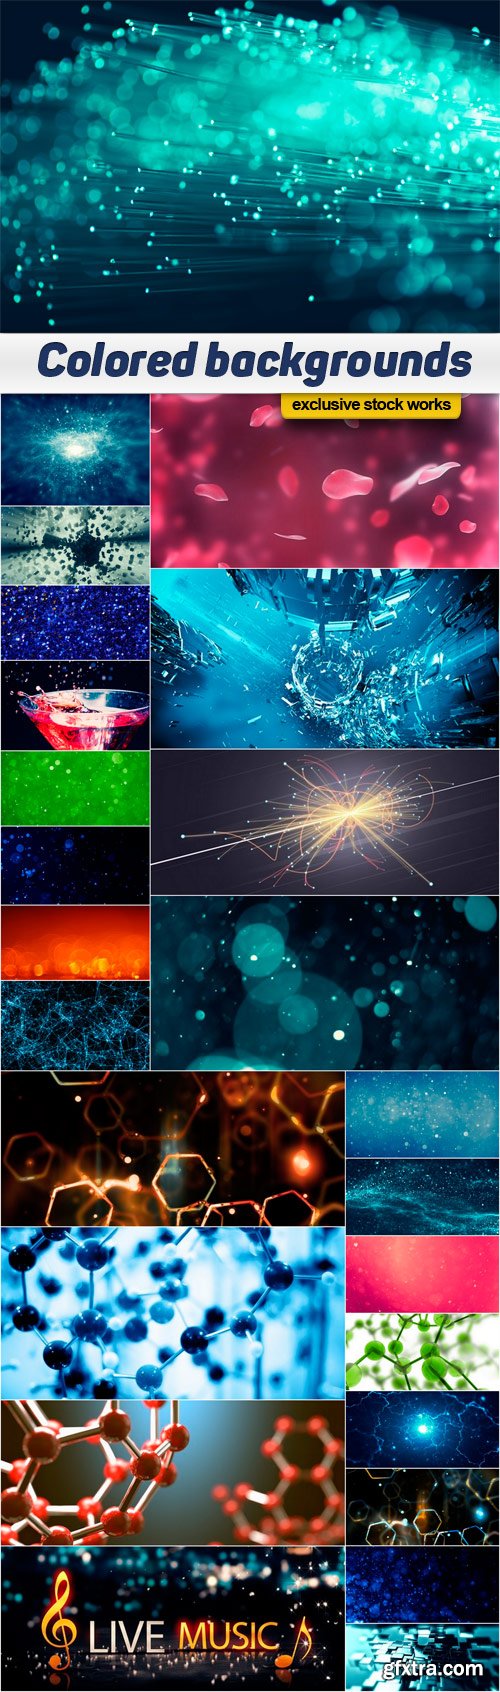 Colored backgrounds - 25x JPEG